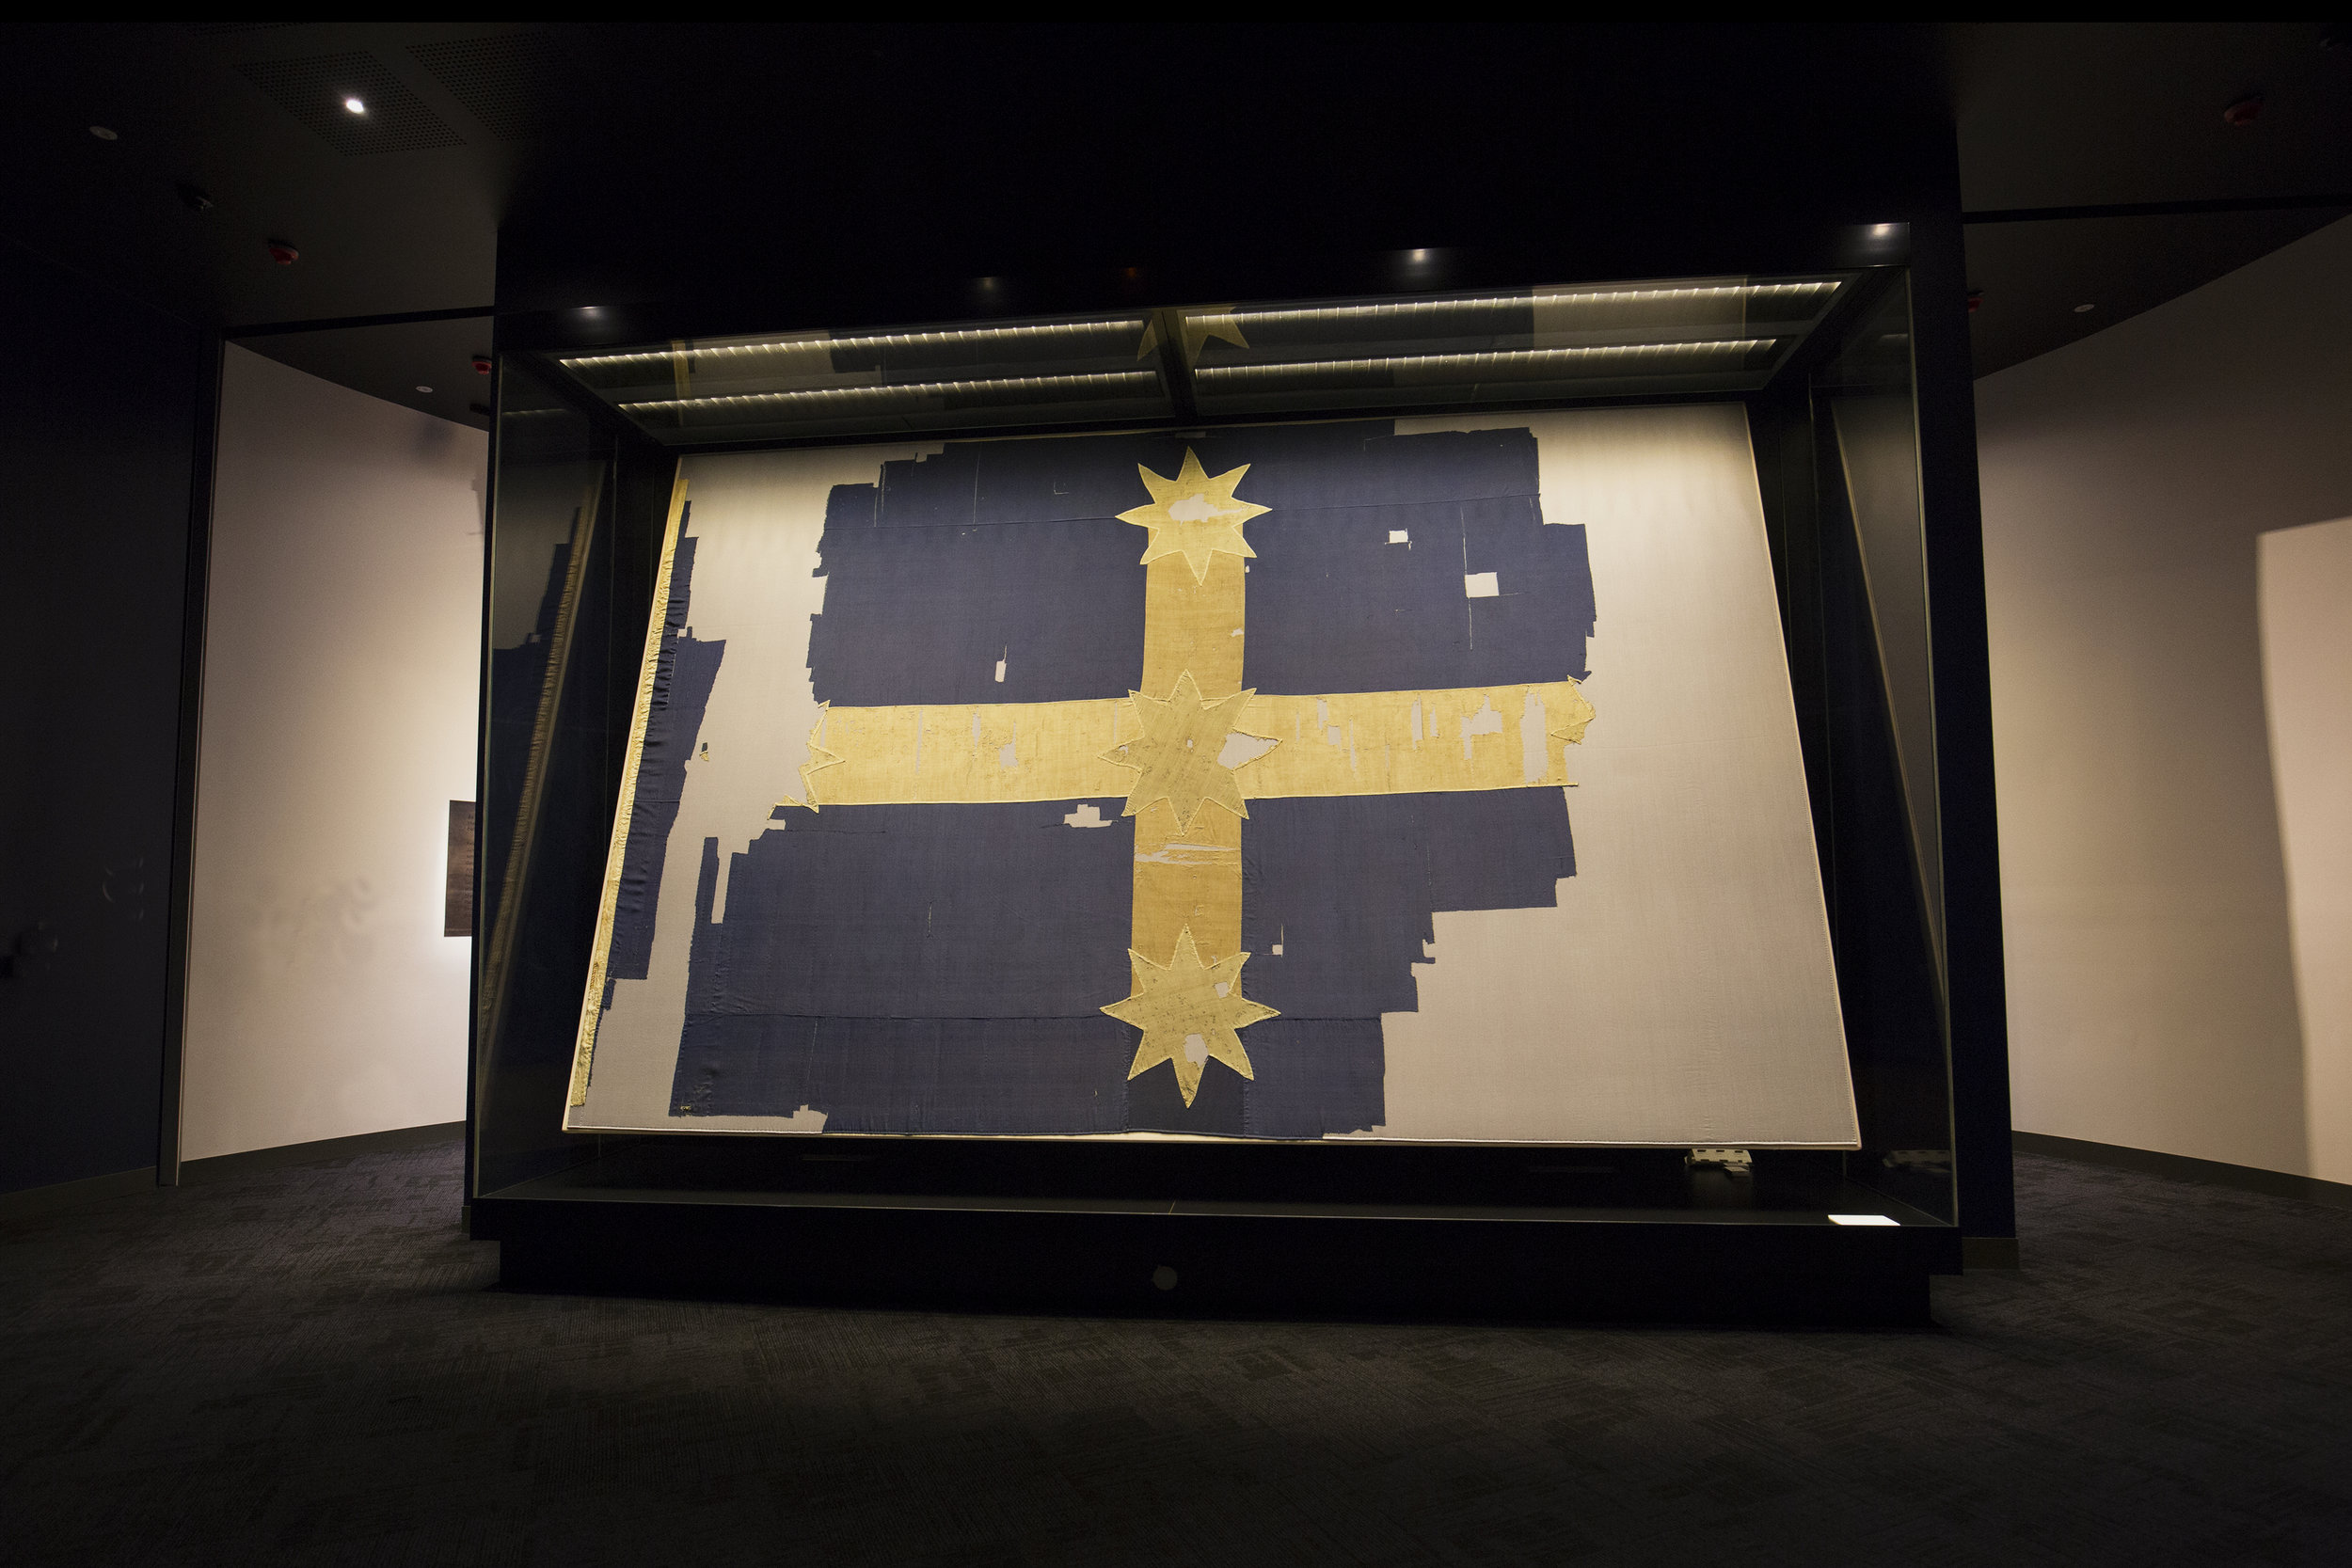 The flag of the Southern Cross